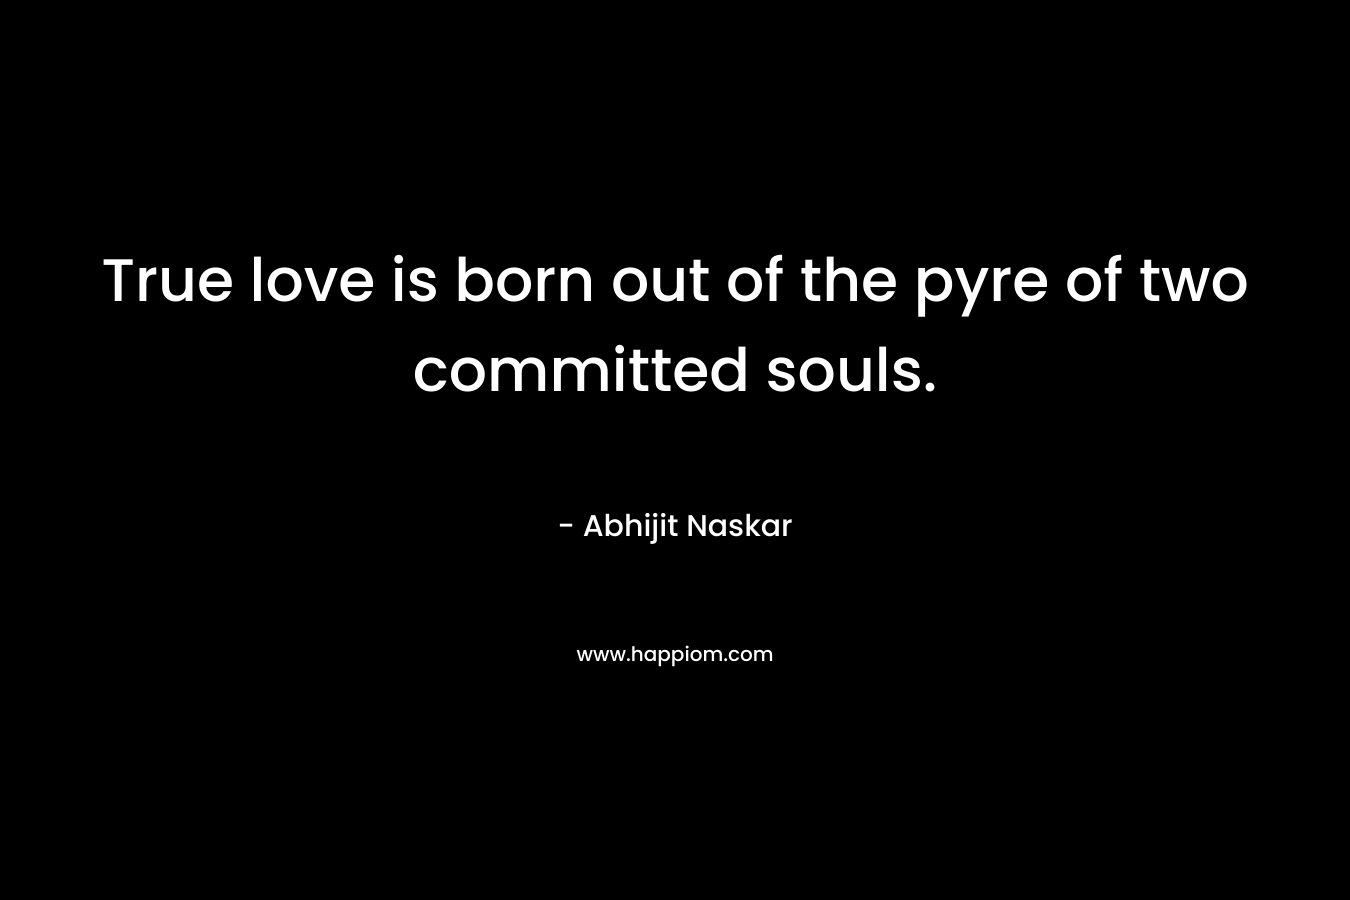 True love is born out of the pyre of two committed souls.